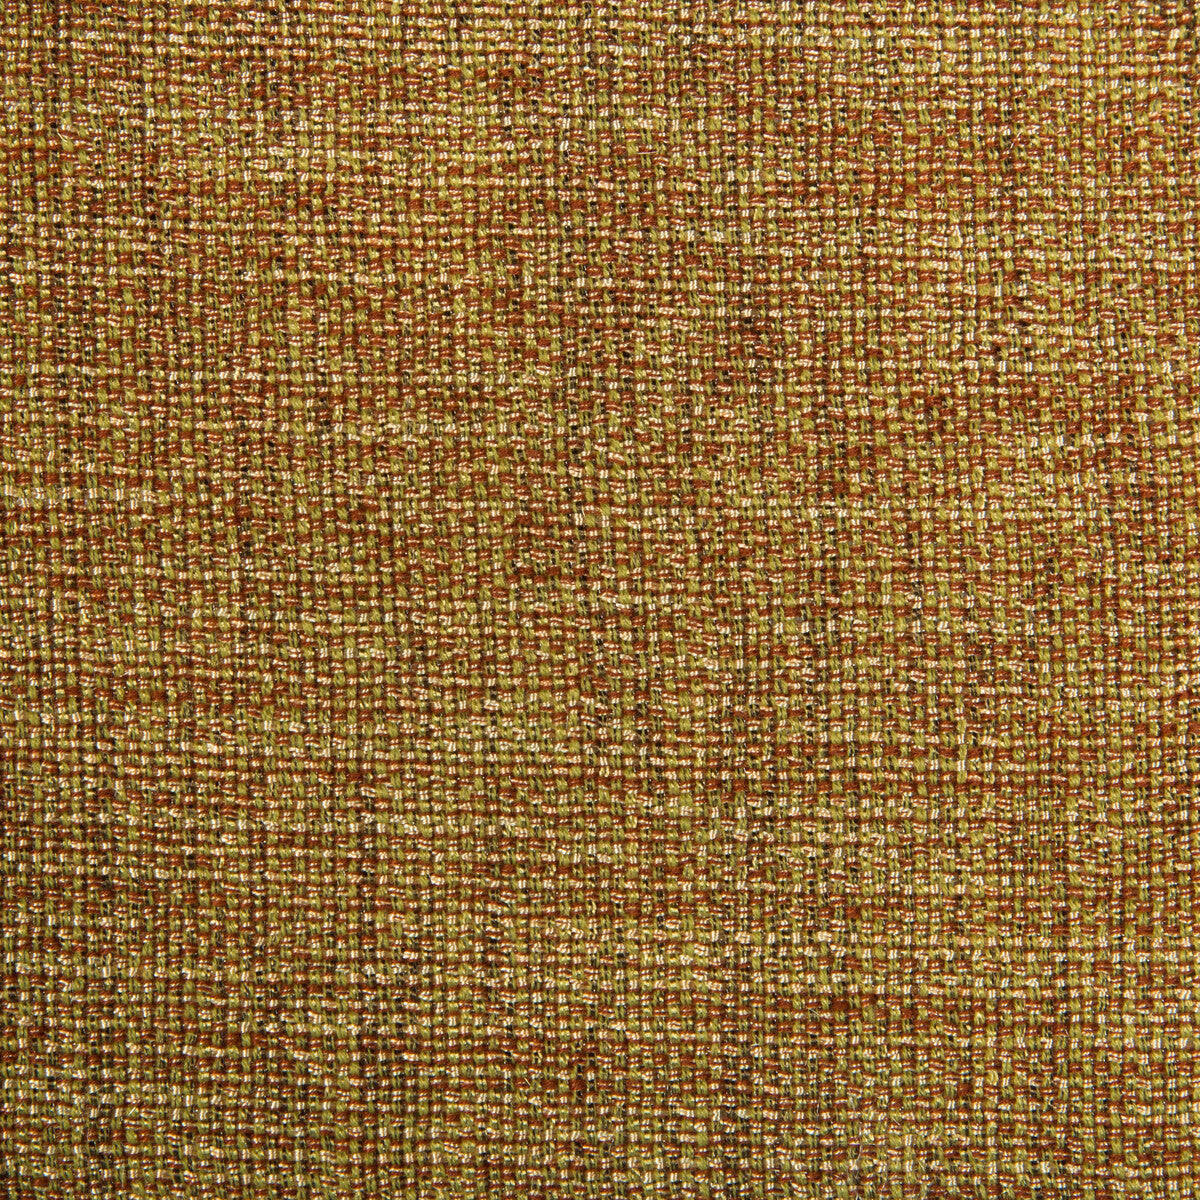 Kravet Contract fabric in 4458-324 color - pattern 4458.324.0 - by Kravet Contract